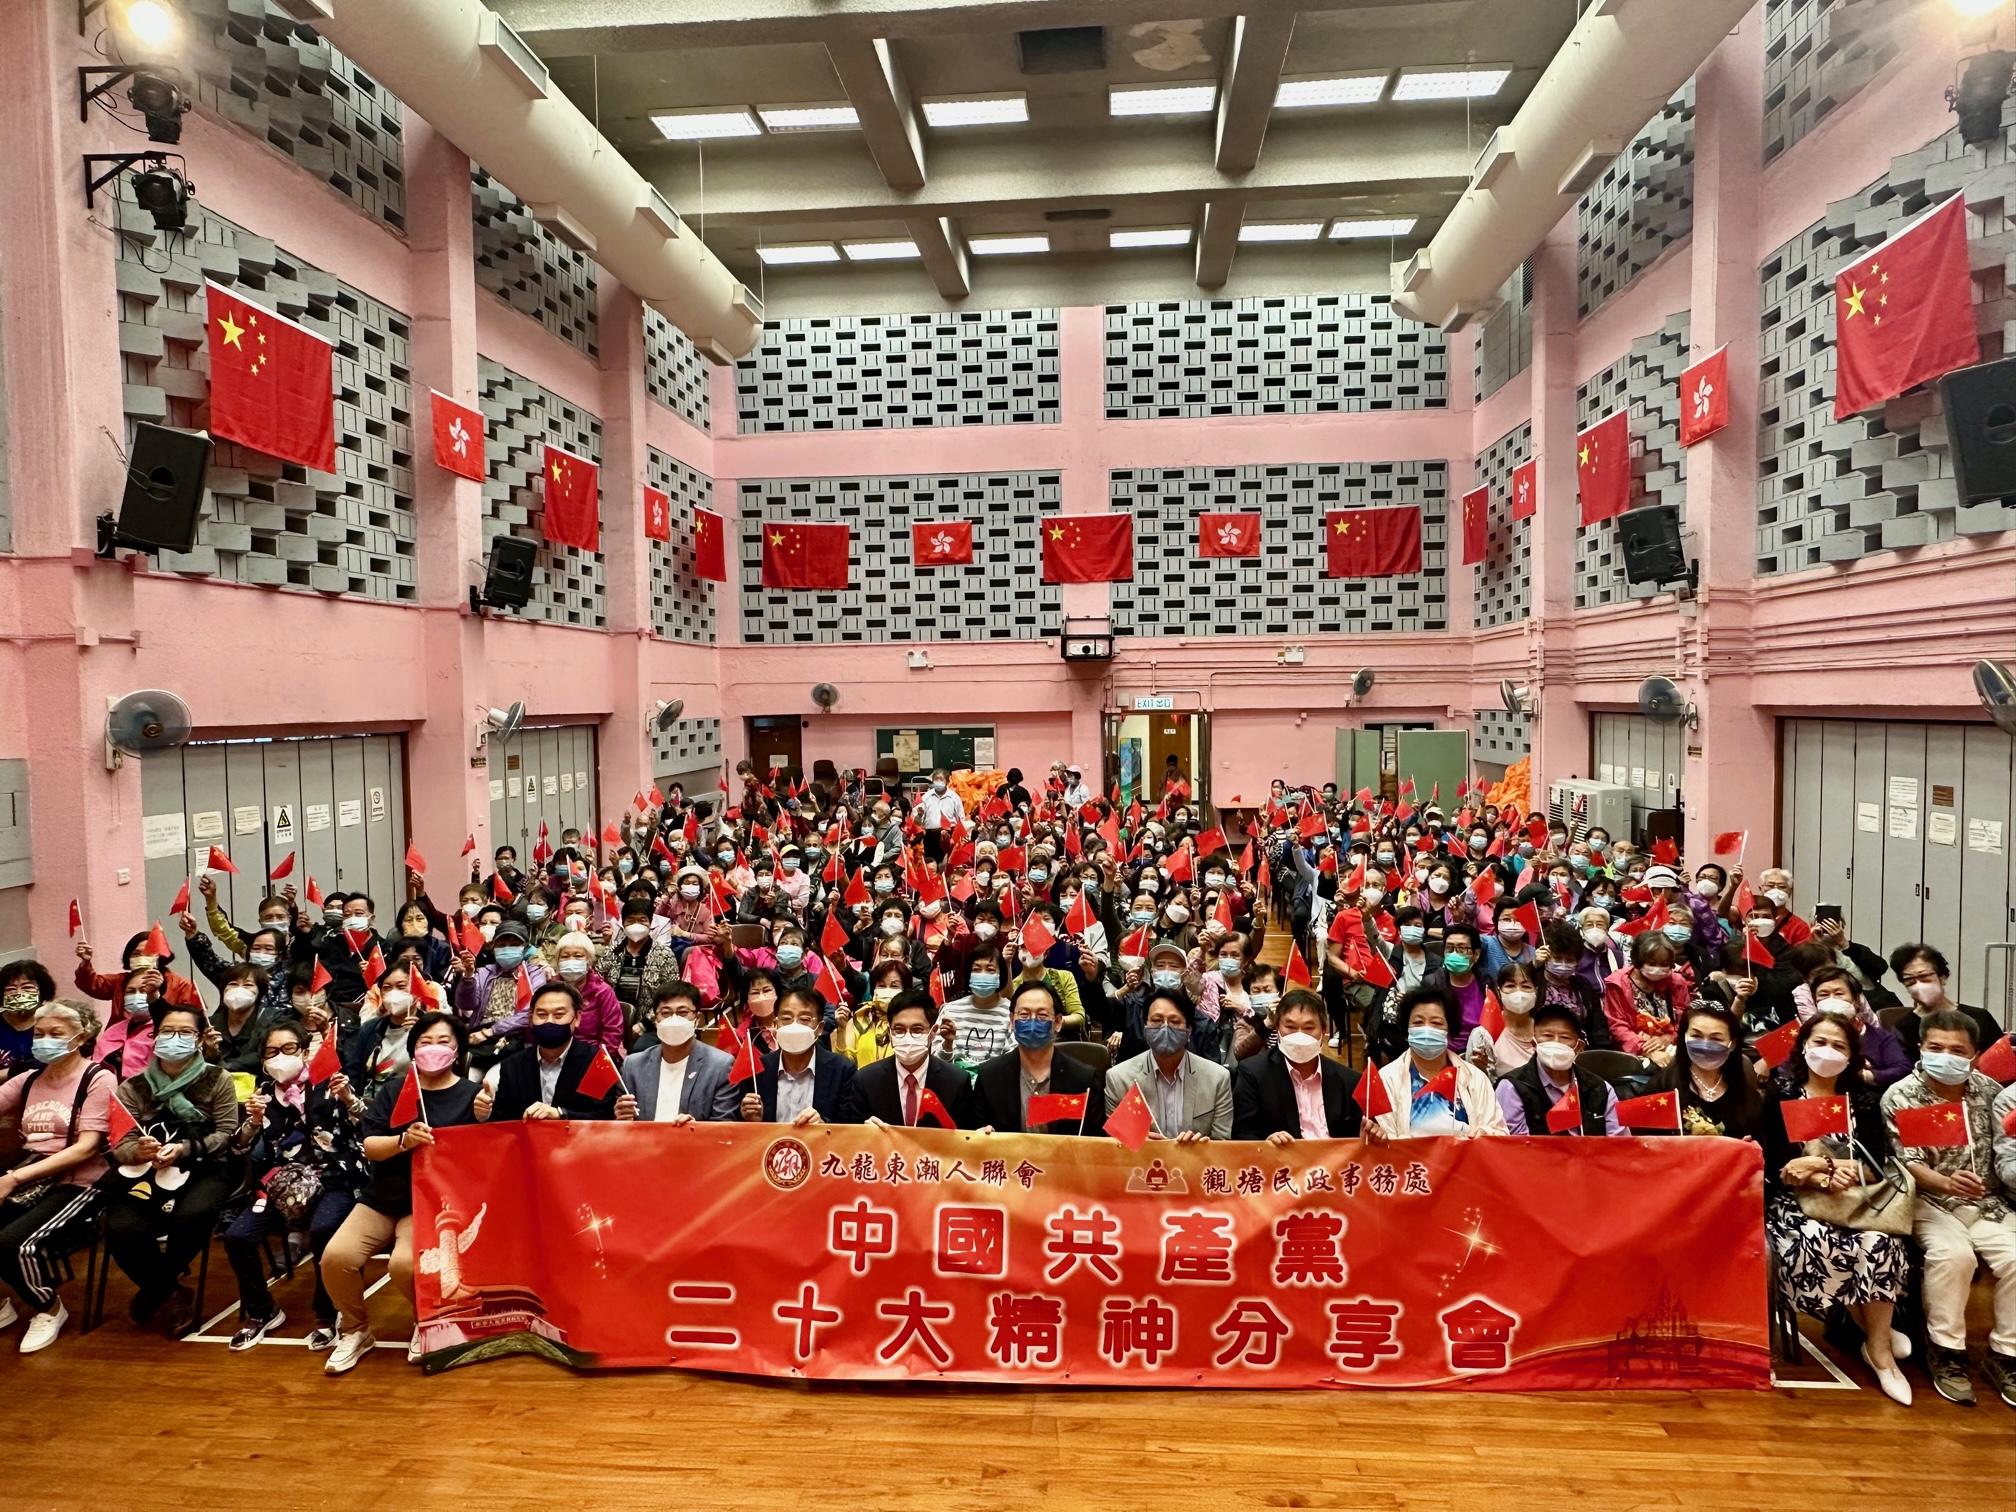 The Kwun Tong District Office, together with the Kowloon East Chaoren Association, held a session on "Spirit of the 20th National Congress of the CPC" at Kai Yip Community Hall on November 4. Photo shows the guests and participants at the session.